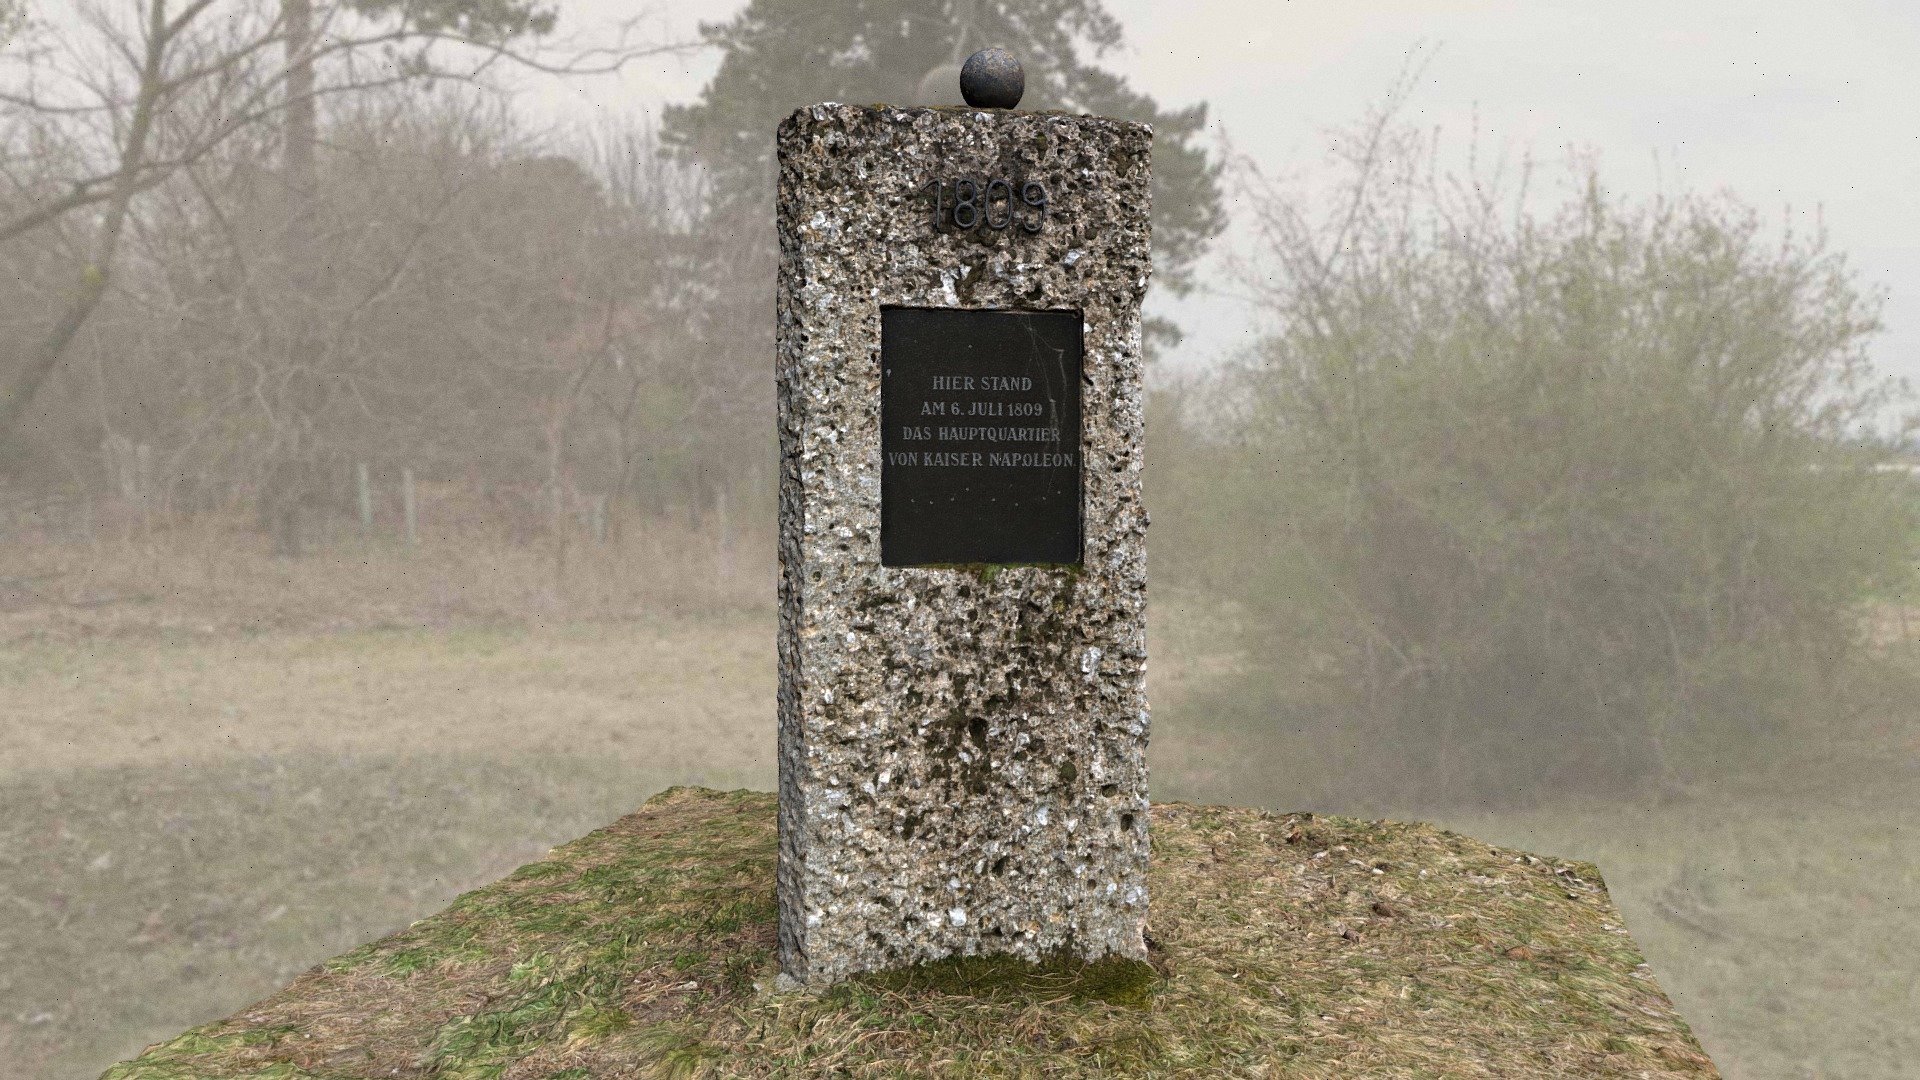 A few weeks after the defeat at the Battle of Aspern, Napoelon deployed his troops again to clear the Marchfeld and the road to the north. Napoleon had his headquarters in July 1809 at Raasdorf, where this memorial stone stands today 3d model